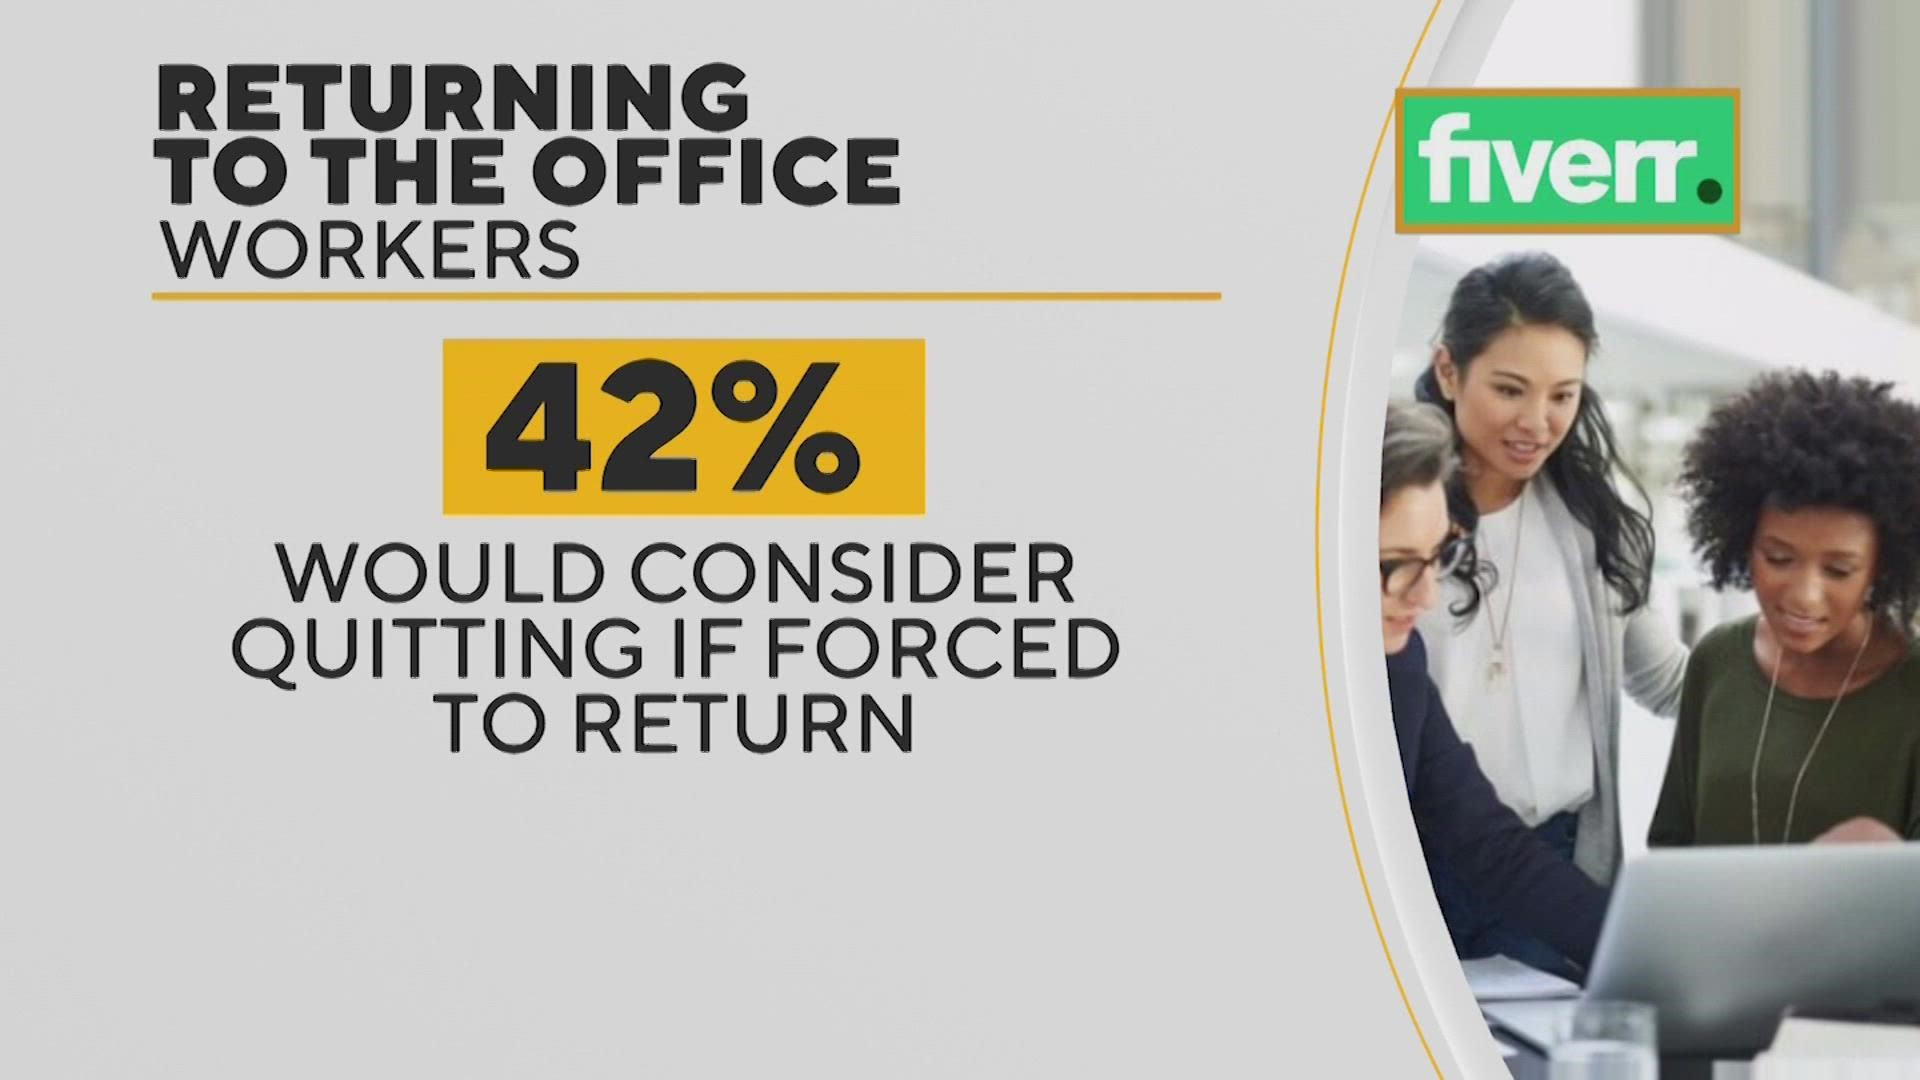 In a survey by Fiverr, 42% of workers said they'd consider quitting if forced to be in the office full-time.